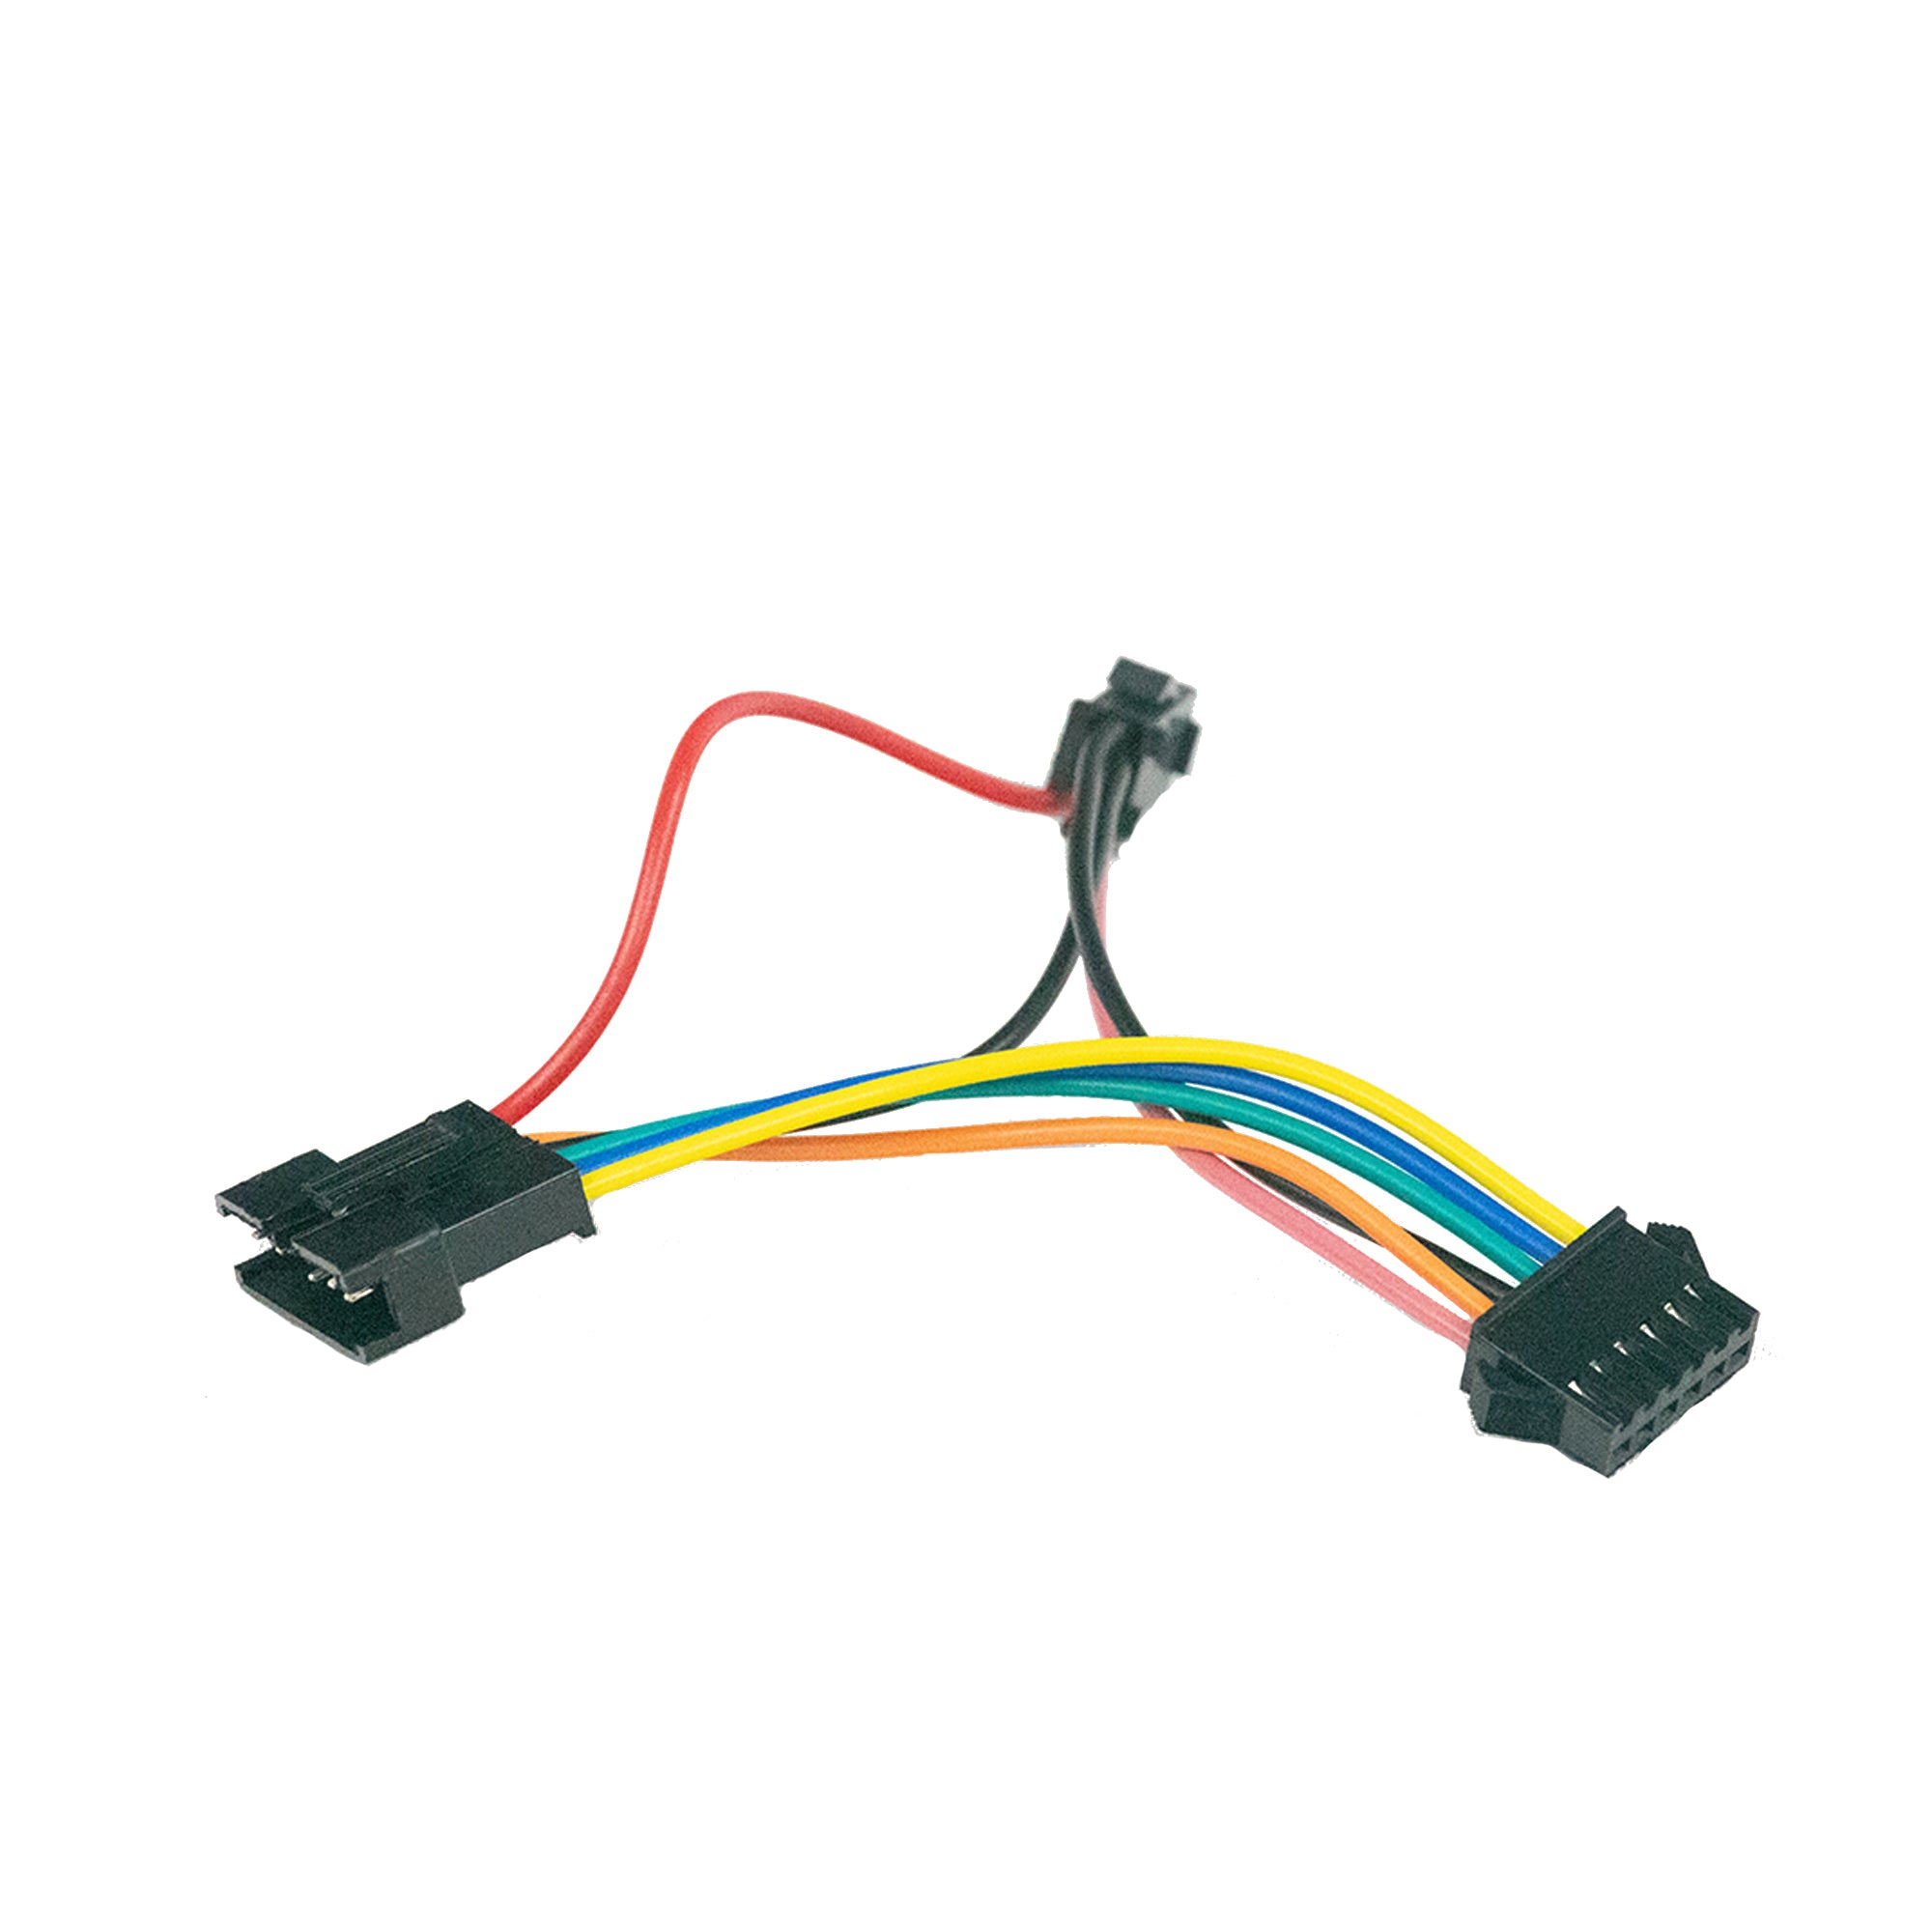 Bermuda Triangle Corded Wires for Light Connection (EMOVE Cruiser)